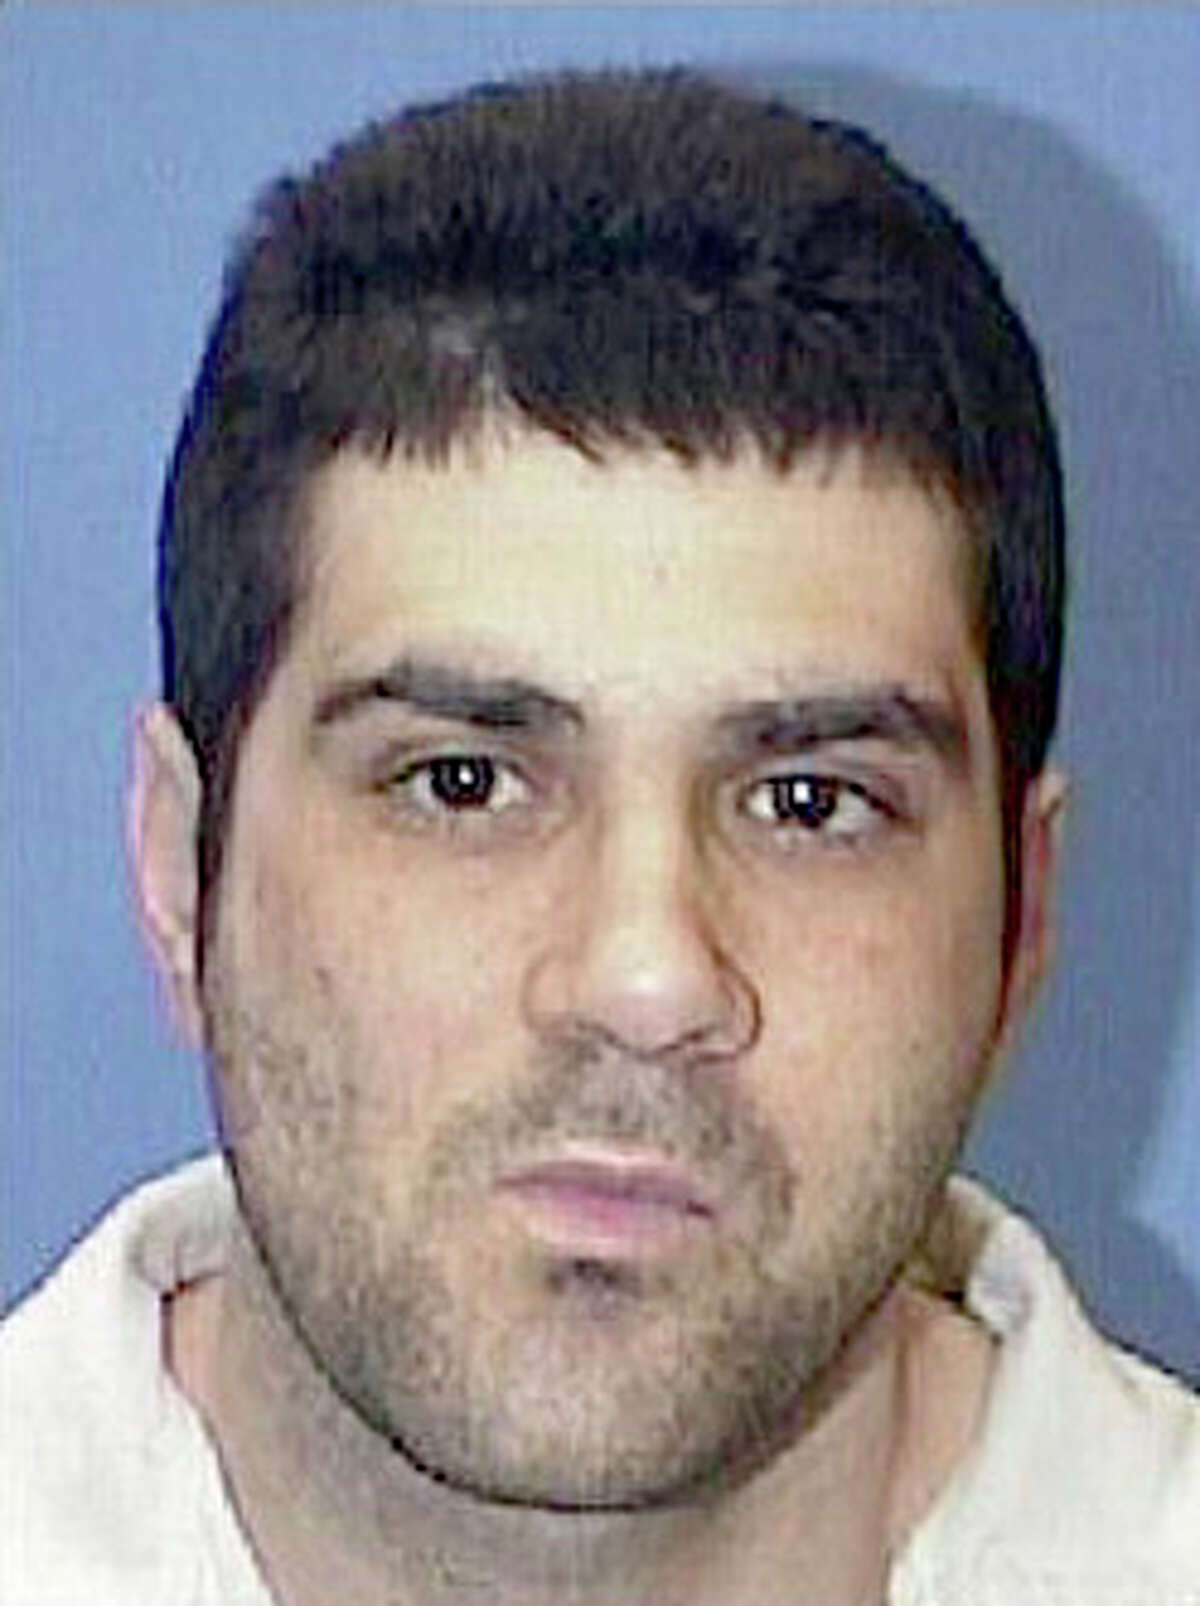 Flawed forensic science led to the execution of Cameron Todd Willingham in 2004 in the arson deaths of his daughters.